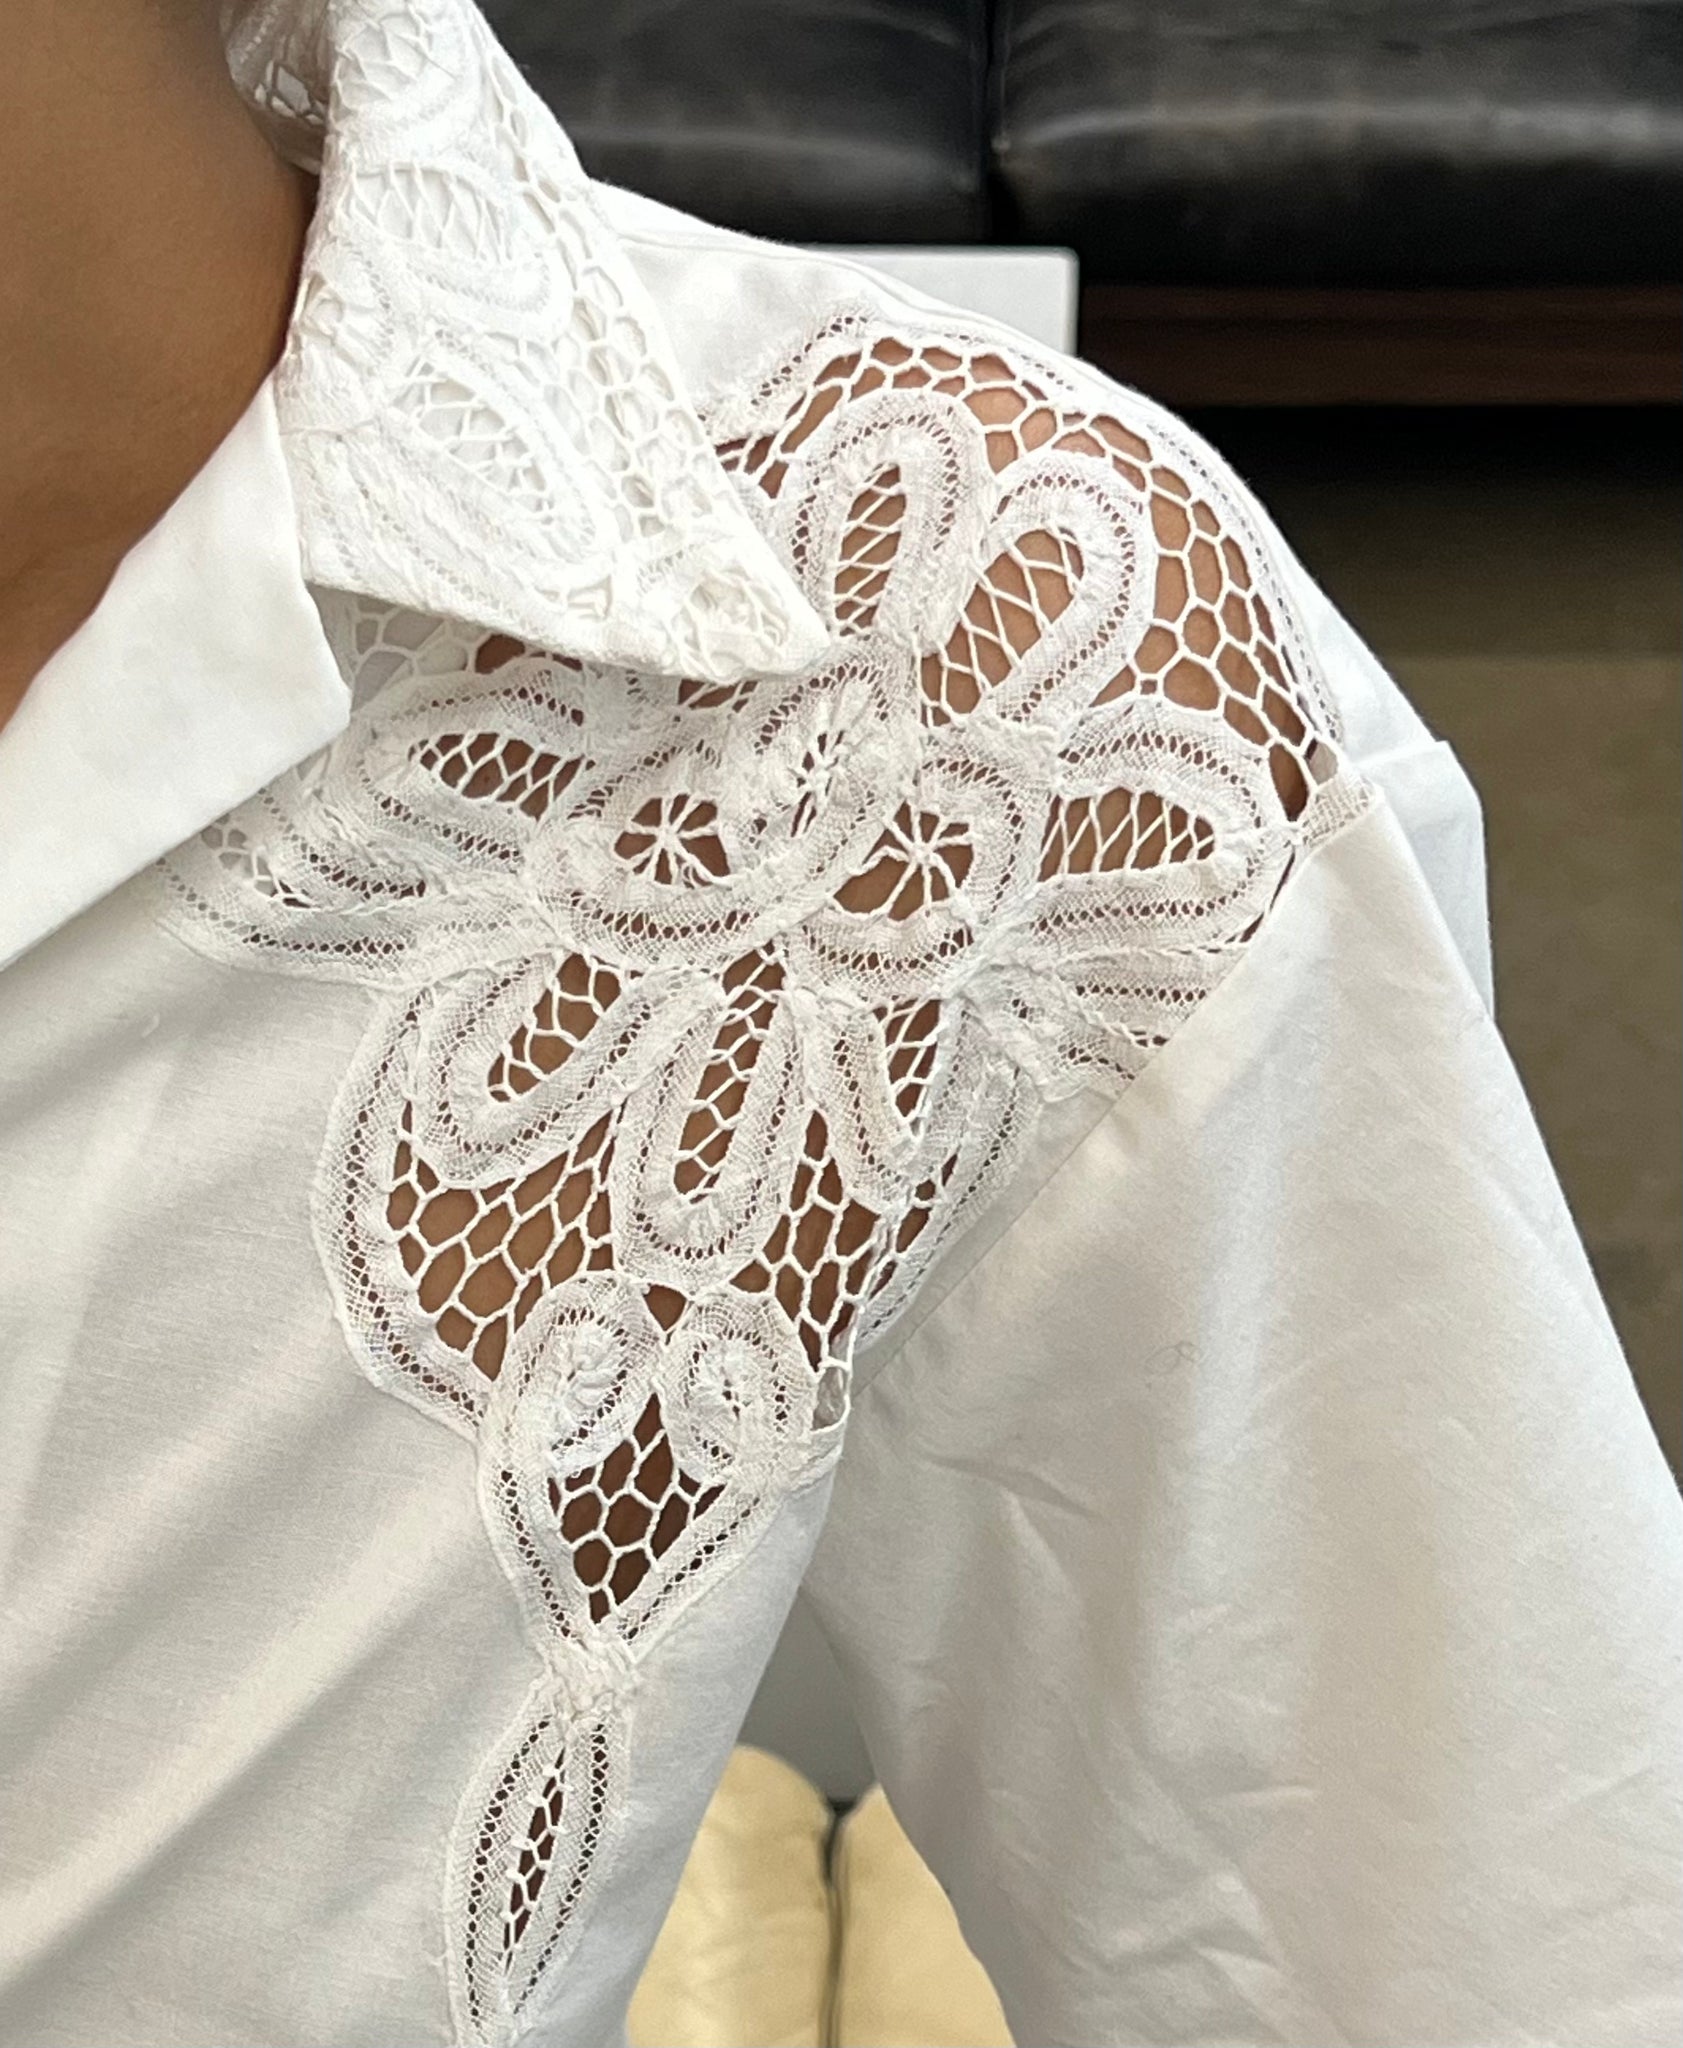 Fleur blouse in white with lace flowers by shop toni